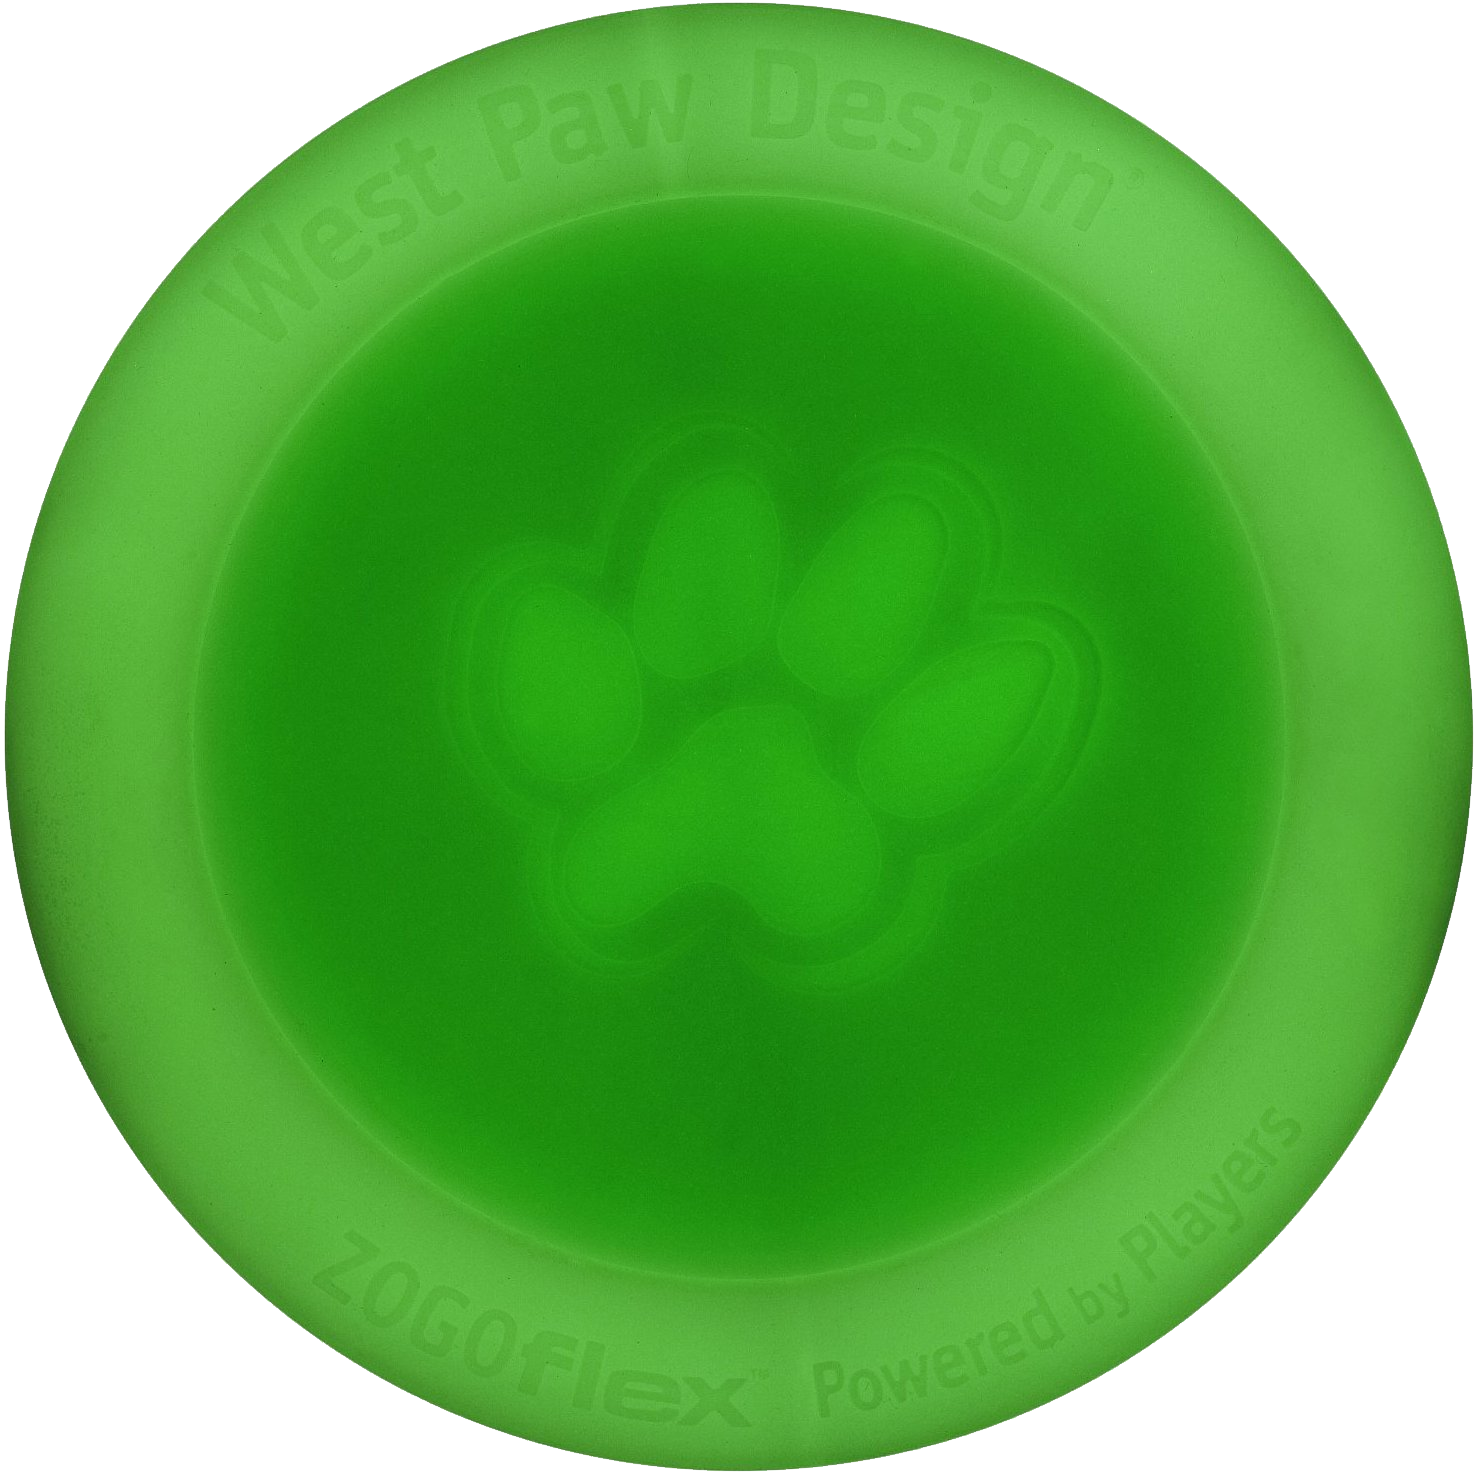 Green Dog Frisbee Top View PNG